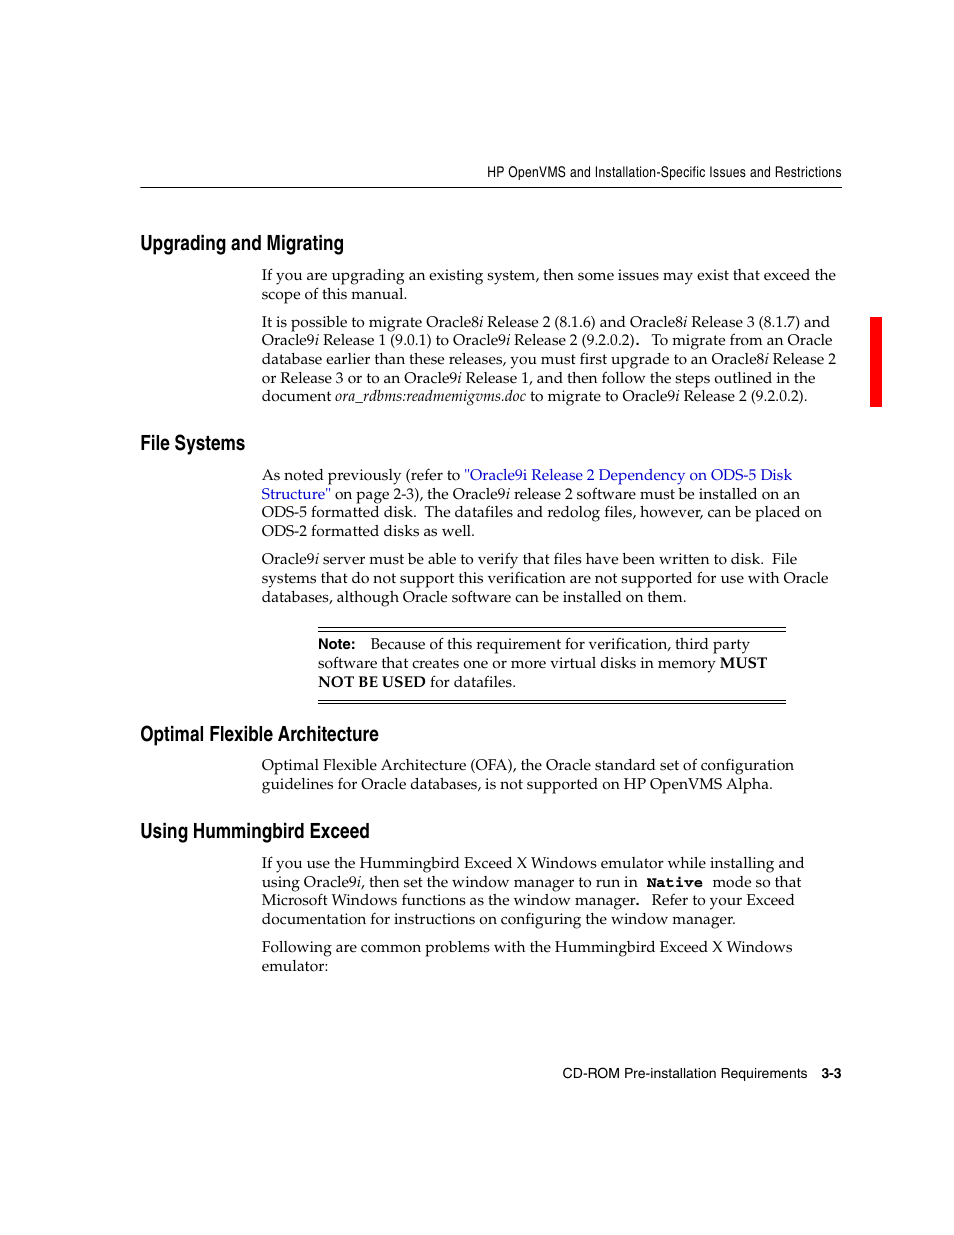 Upgrading and migrating, File systems, Optimal flexible architecture | Using hummingbird exceed | Oracle Audio Technologies ORACLE9I B10508-01 User Manual | Page 47 / 186